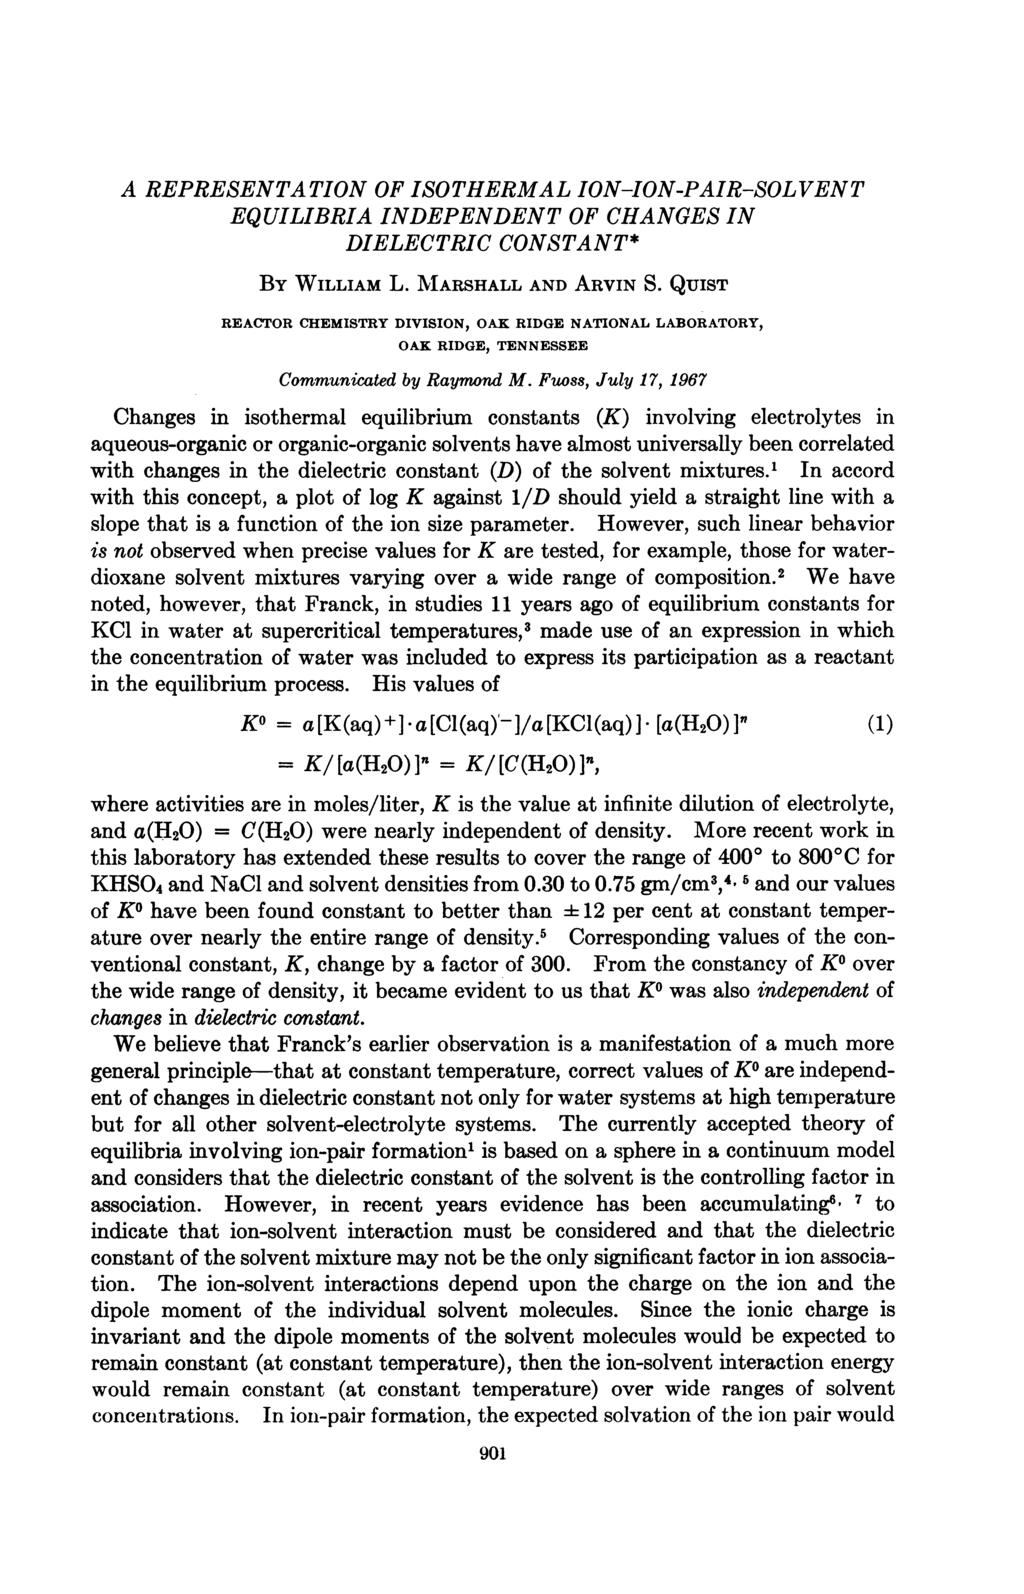 A REPRESENTATION OF ISOTHERMAL ION-ION-PAIR-SOLVENT EQUILIBRIA INDEPENDENT OF CHANGES IN DIELECTRIC CONSTANT* By WILLIAM L. MARSHALL AND ARVIN S.